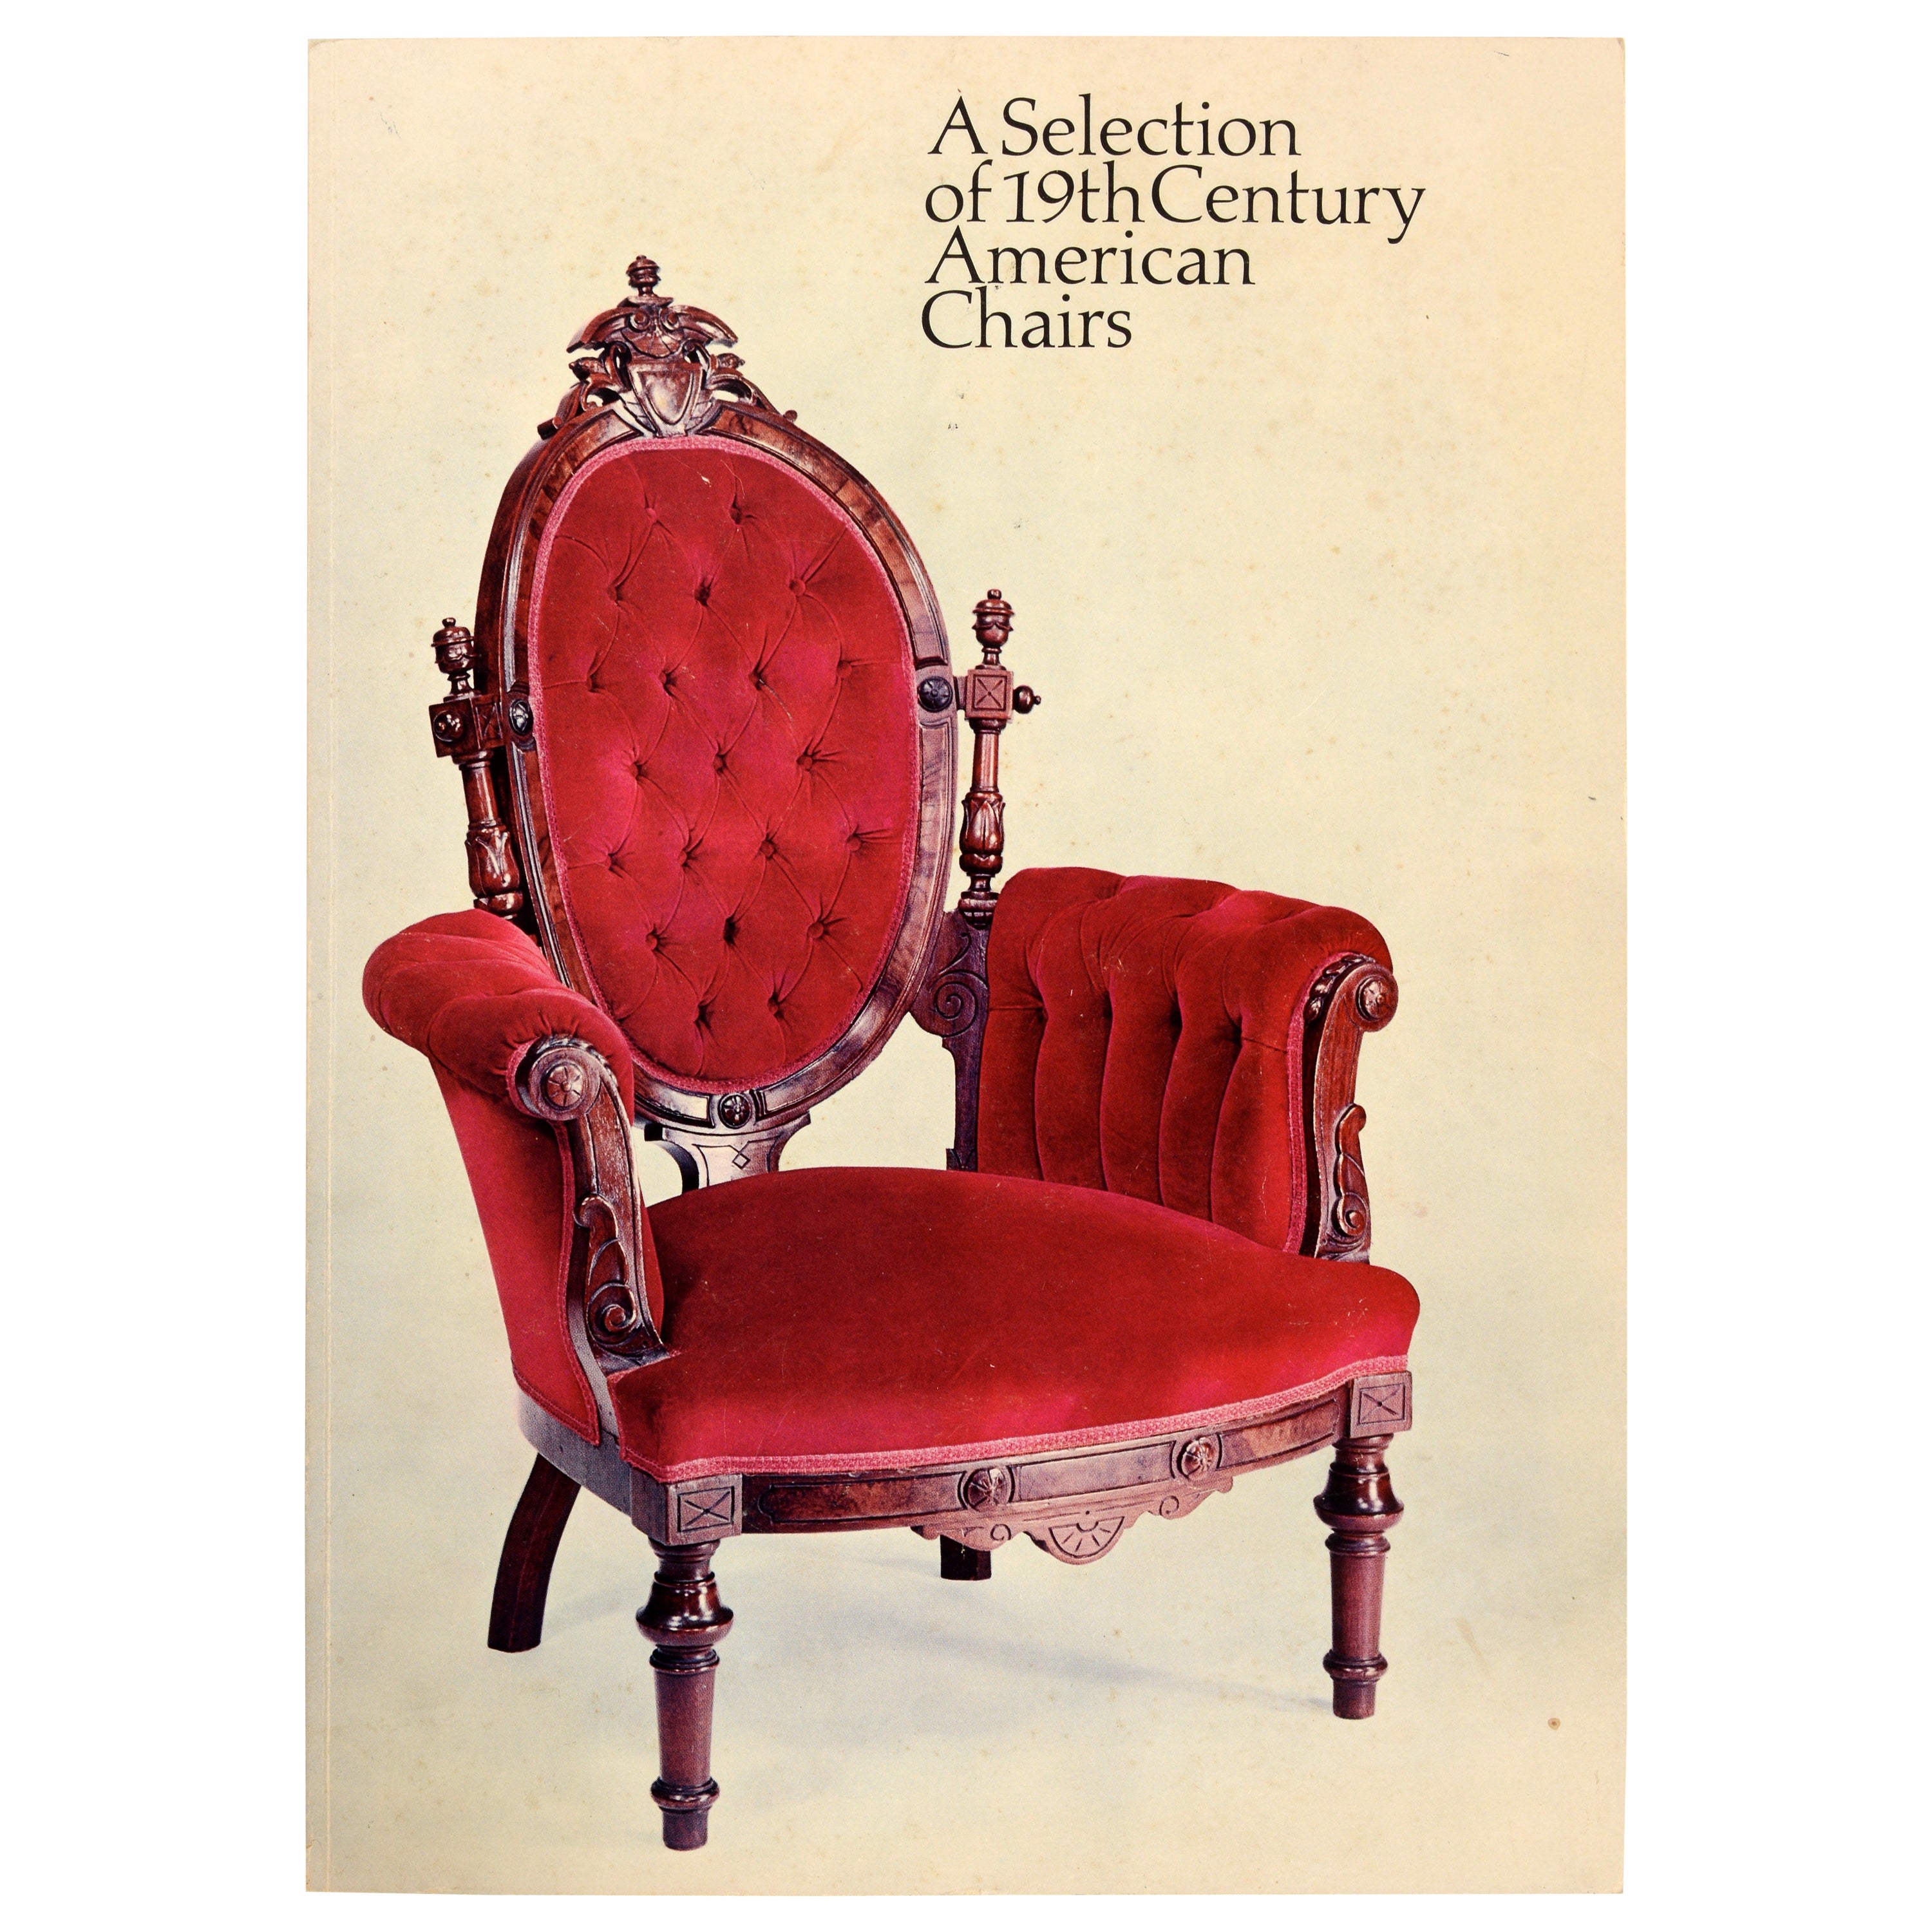 Selection of 19th c American Chairs, Exhib. Catalog Signed by the Author, 1st Ed For Sale